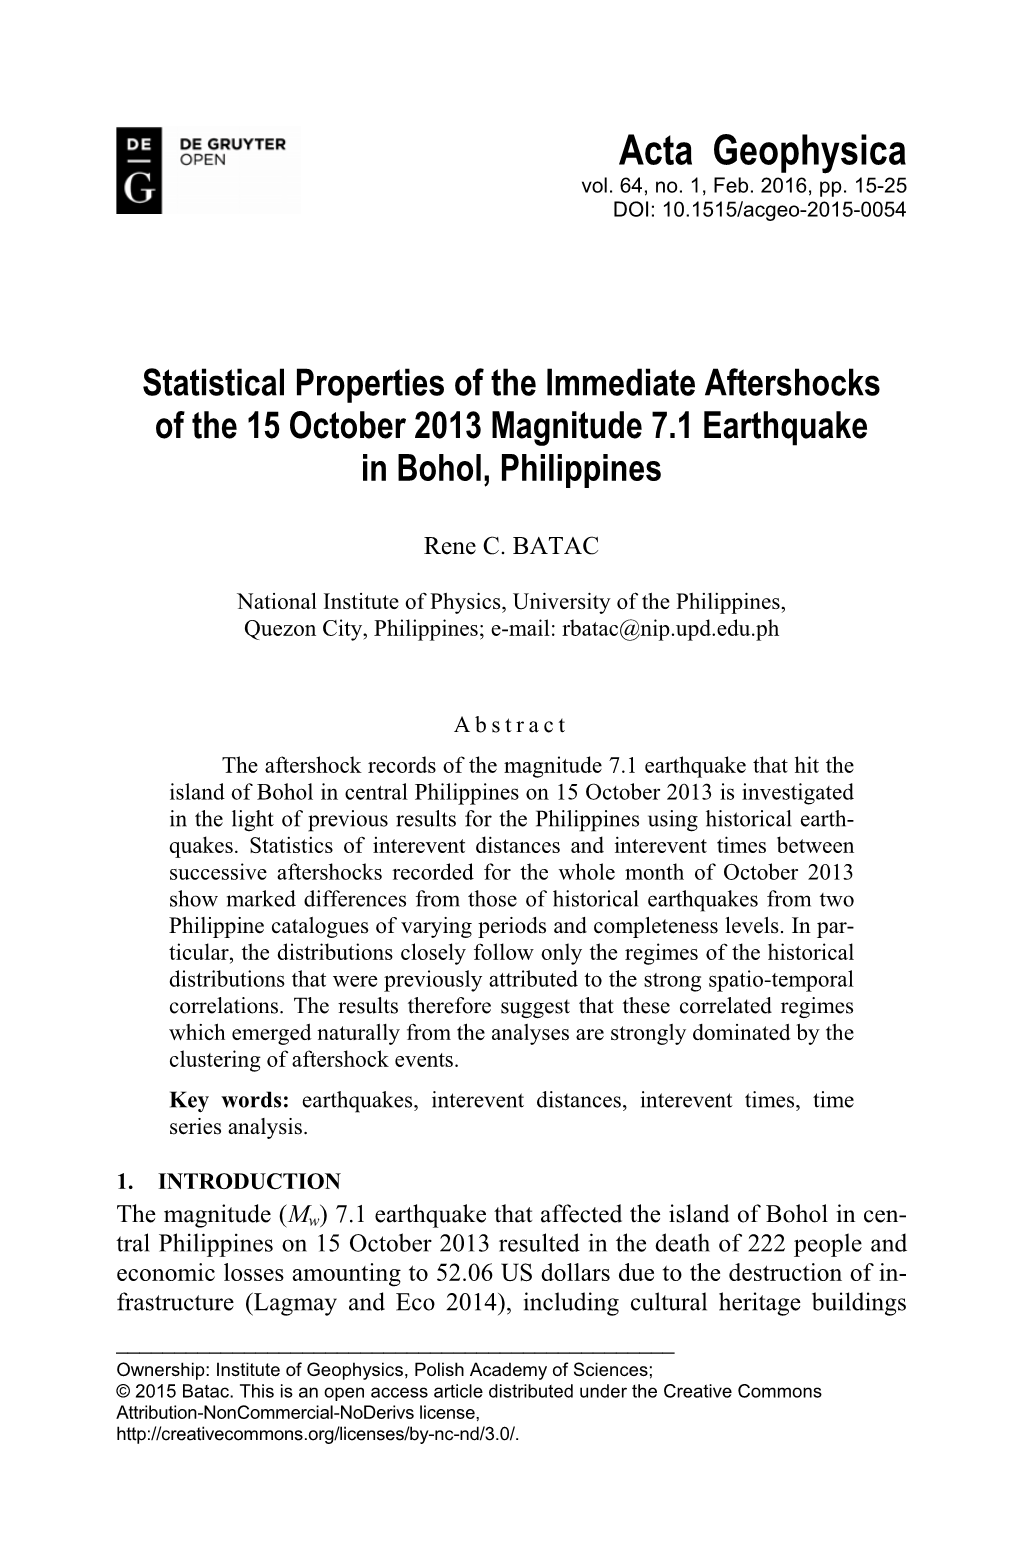 Statistical Properties of the Immediate Aftershocks of the 15 October 2013 Magnitude 7.1 Earthquake in Bohol, Philippines